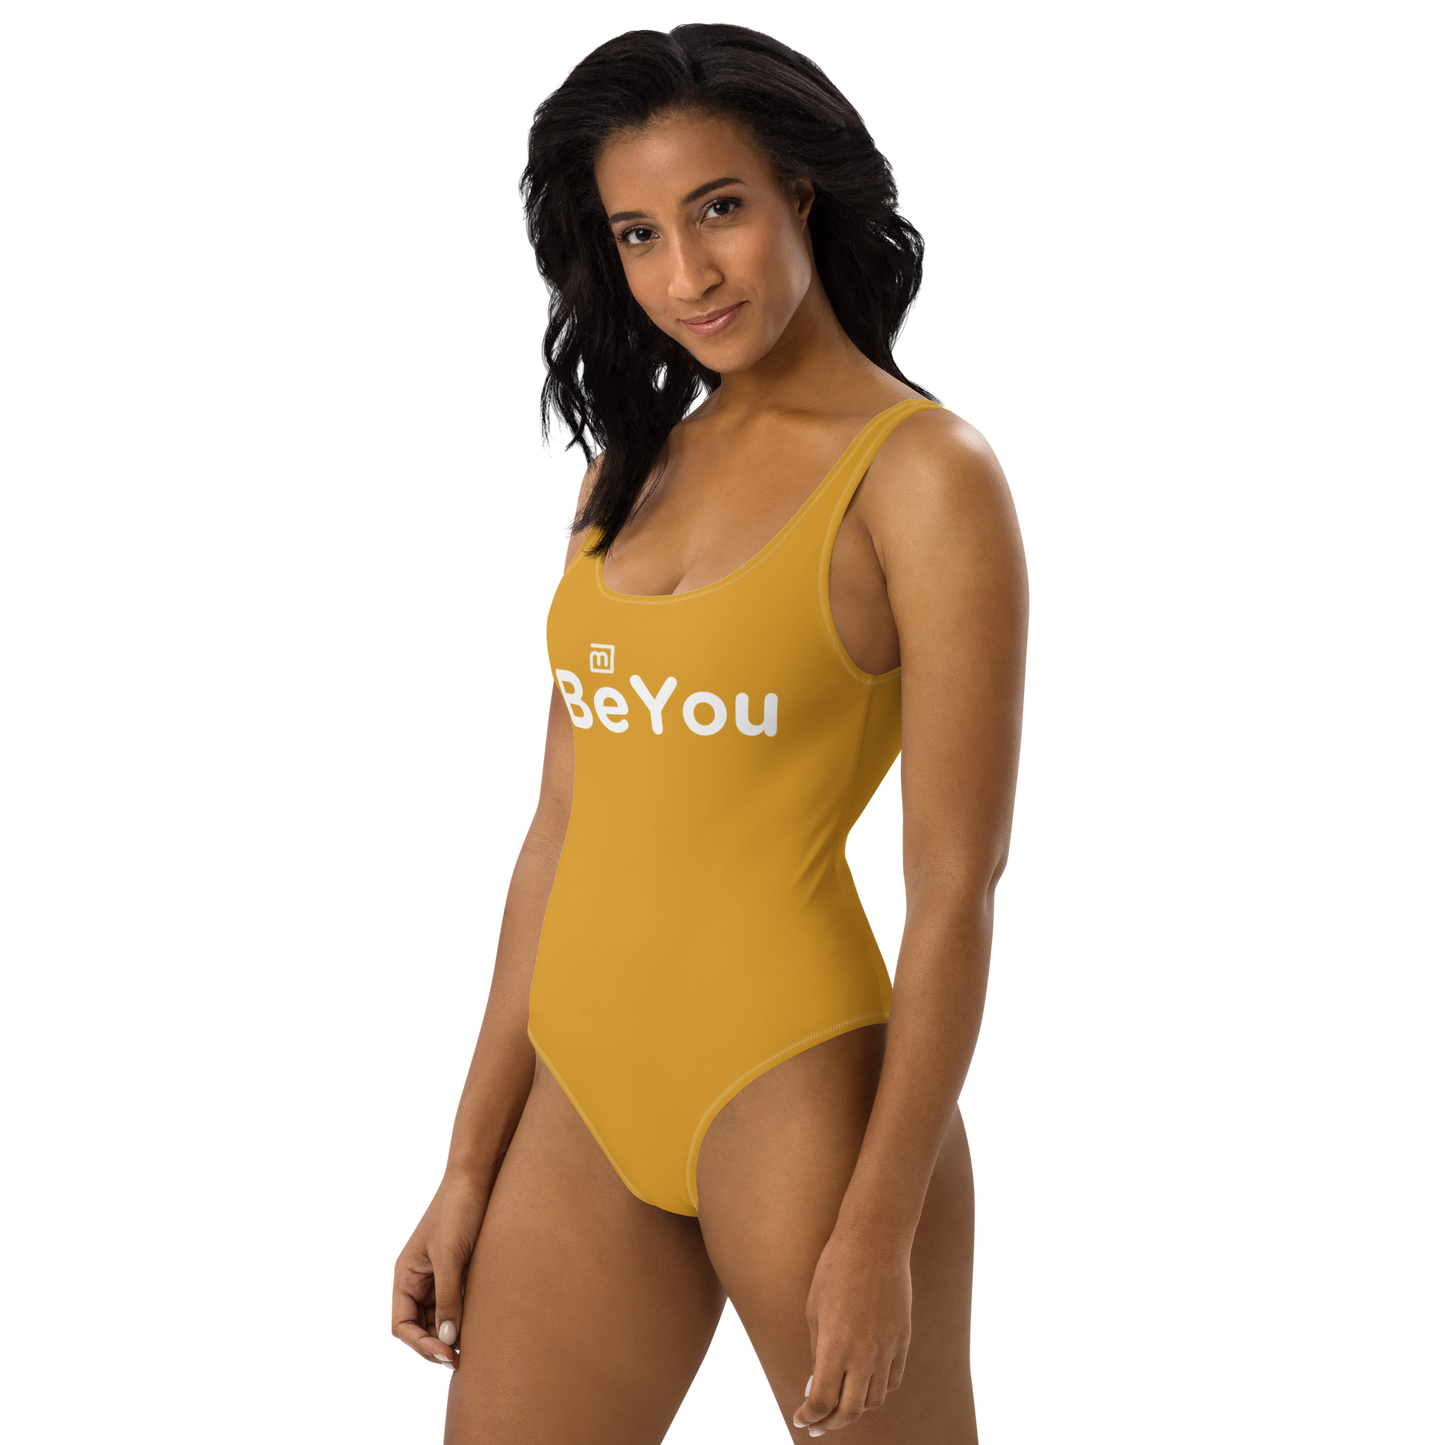 Buttercup Gold One-Piece Body Shaper BeYou Performance Swimsuit